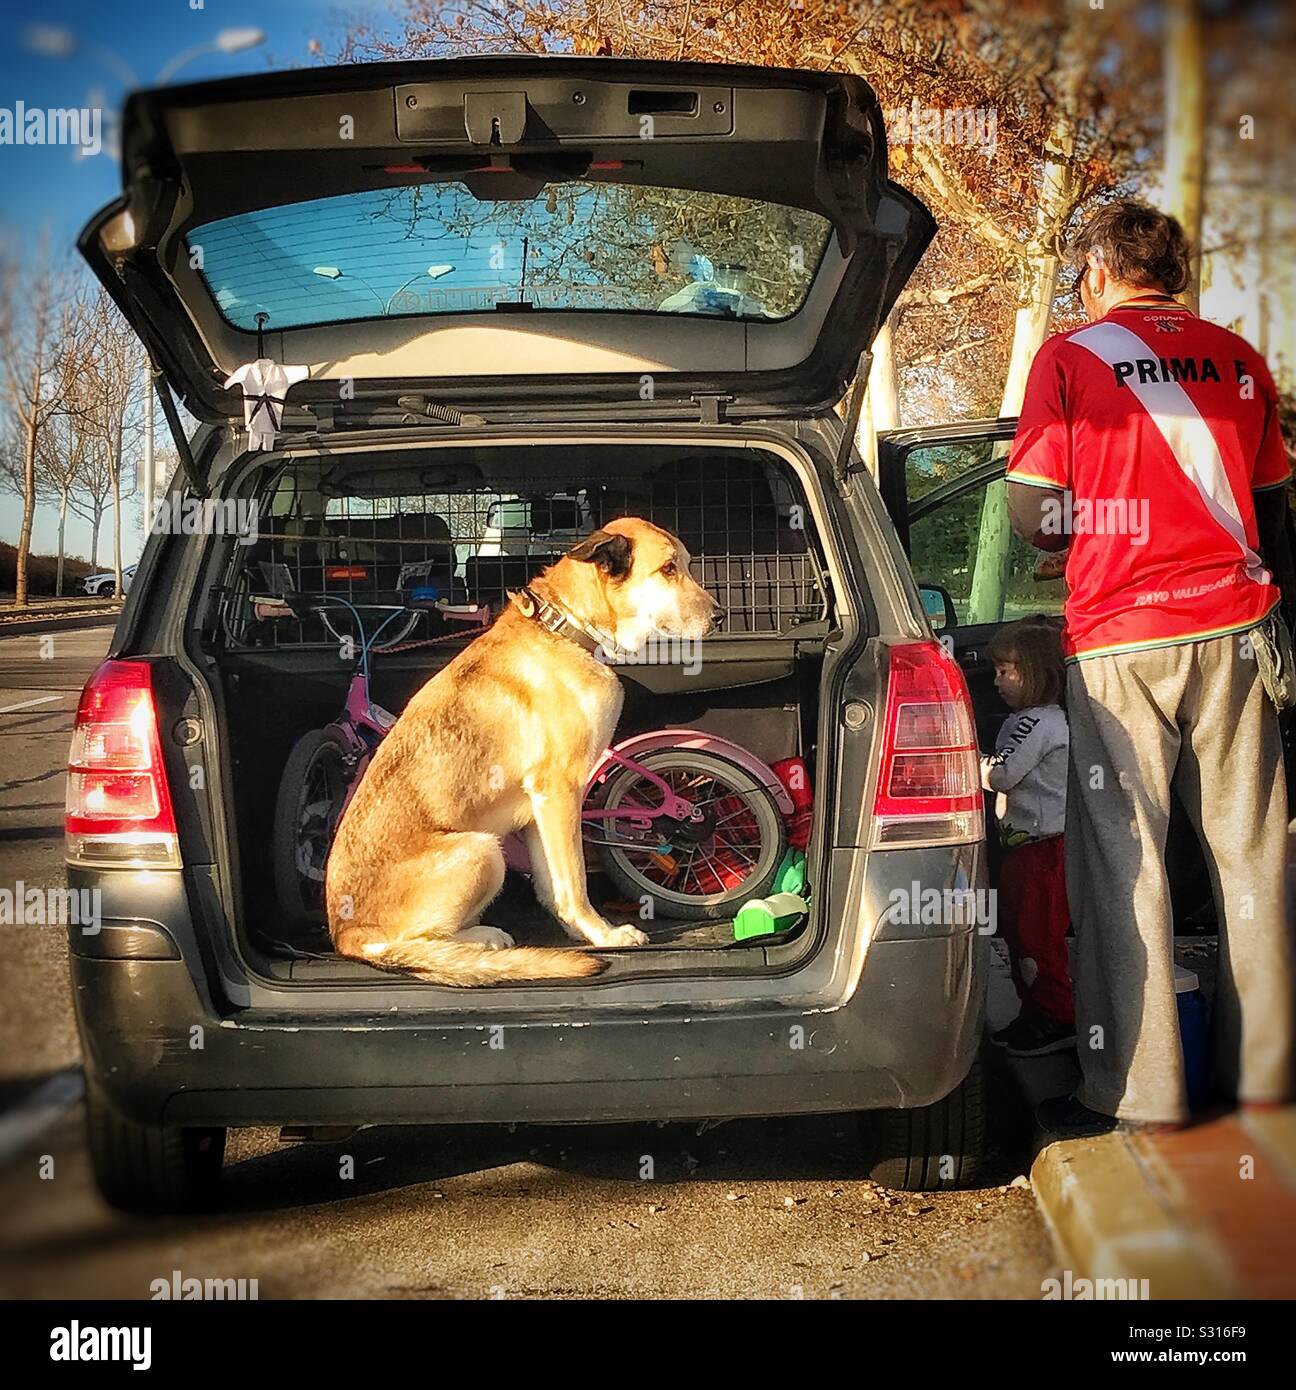 A dog sits patiently in the boot of a car whilst the owner opens a door for his young daughter to get in. A child’s bicycle in the boot indicates that they have just returned from a ride in the park. Stock Photo